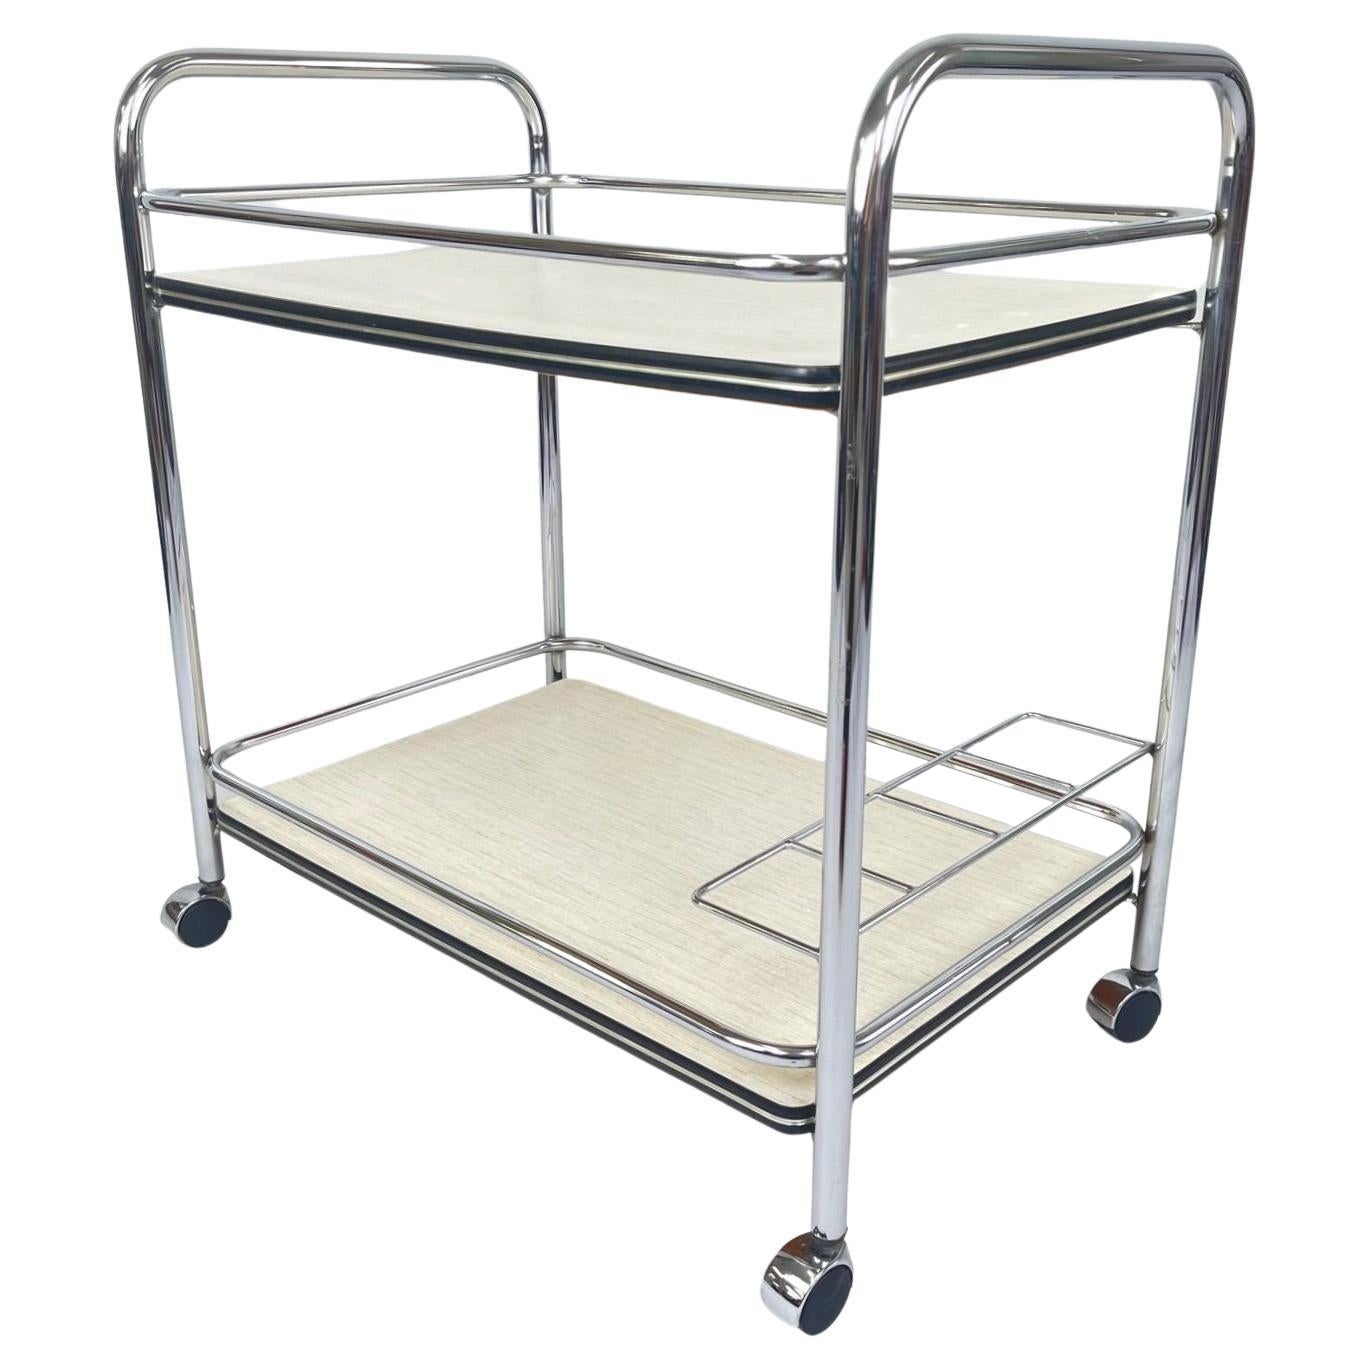 Vintage Chrome and Plywood Serving Cart, 1980's